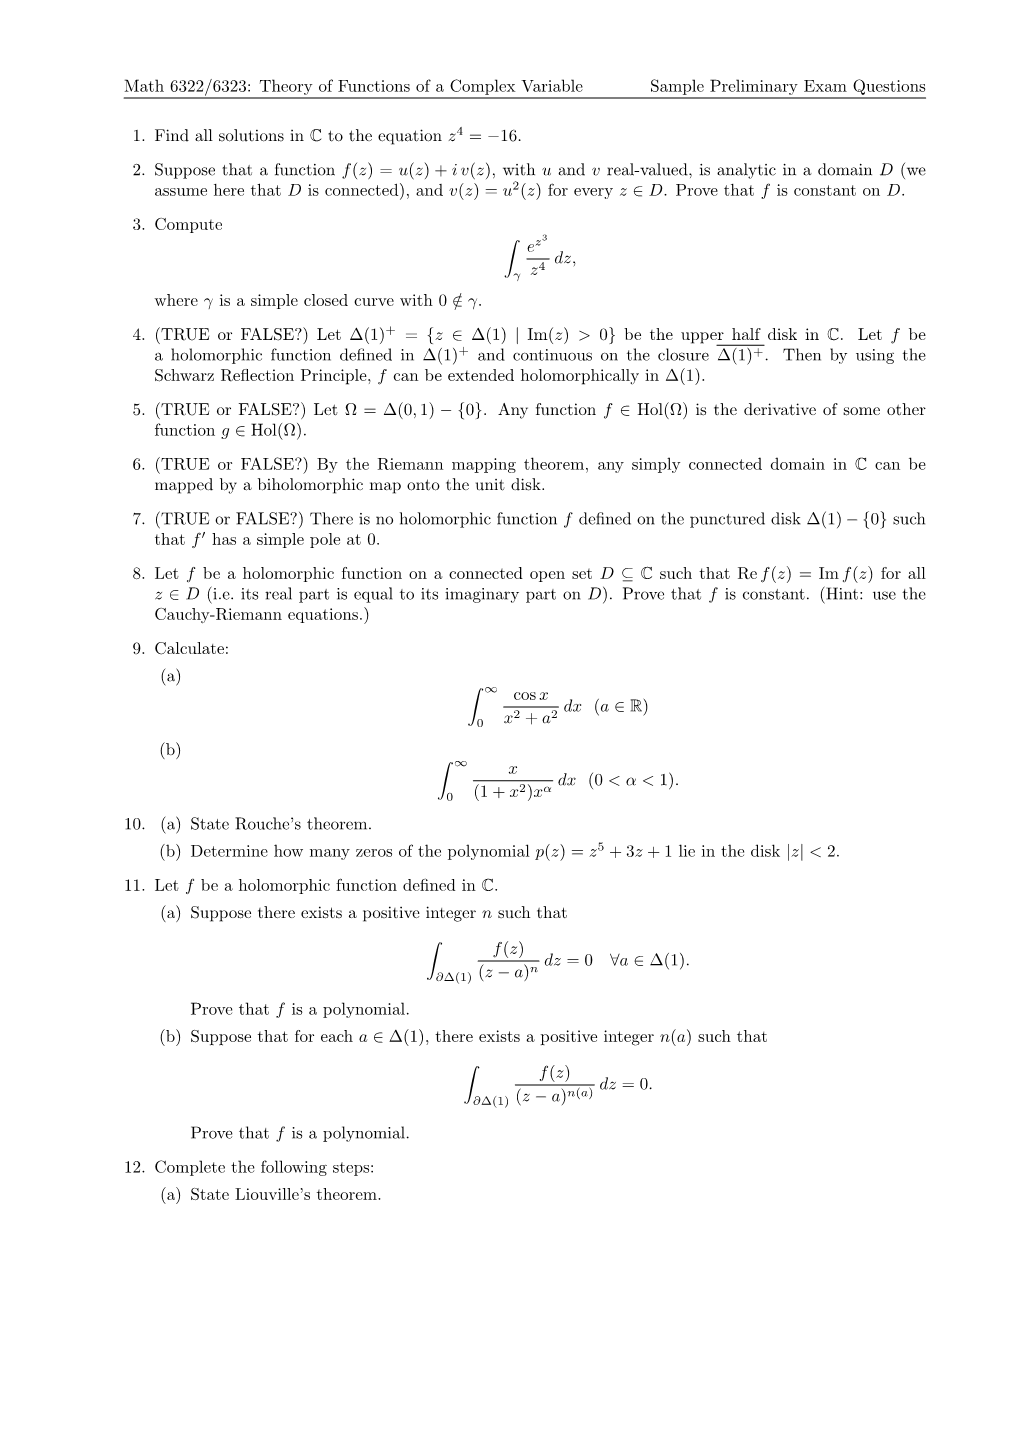 Math 6322/6323: Theory of Functions of a Complex Variable Sample Preliminary Exam Questions